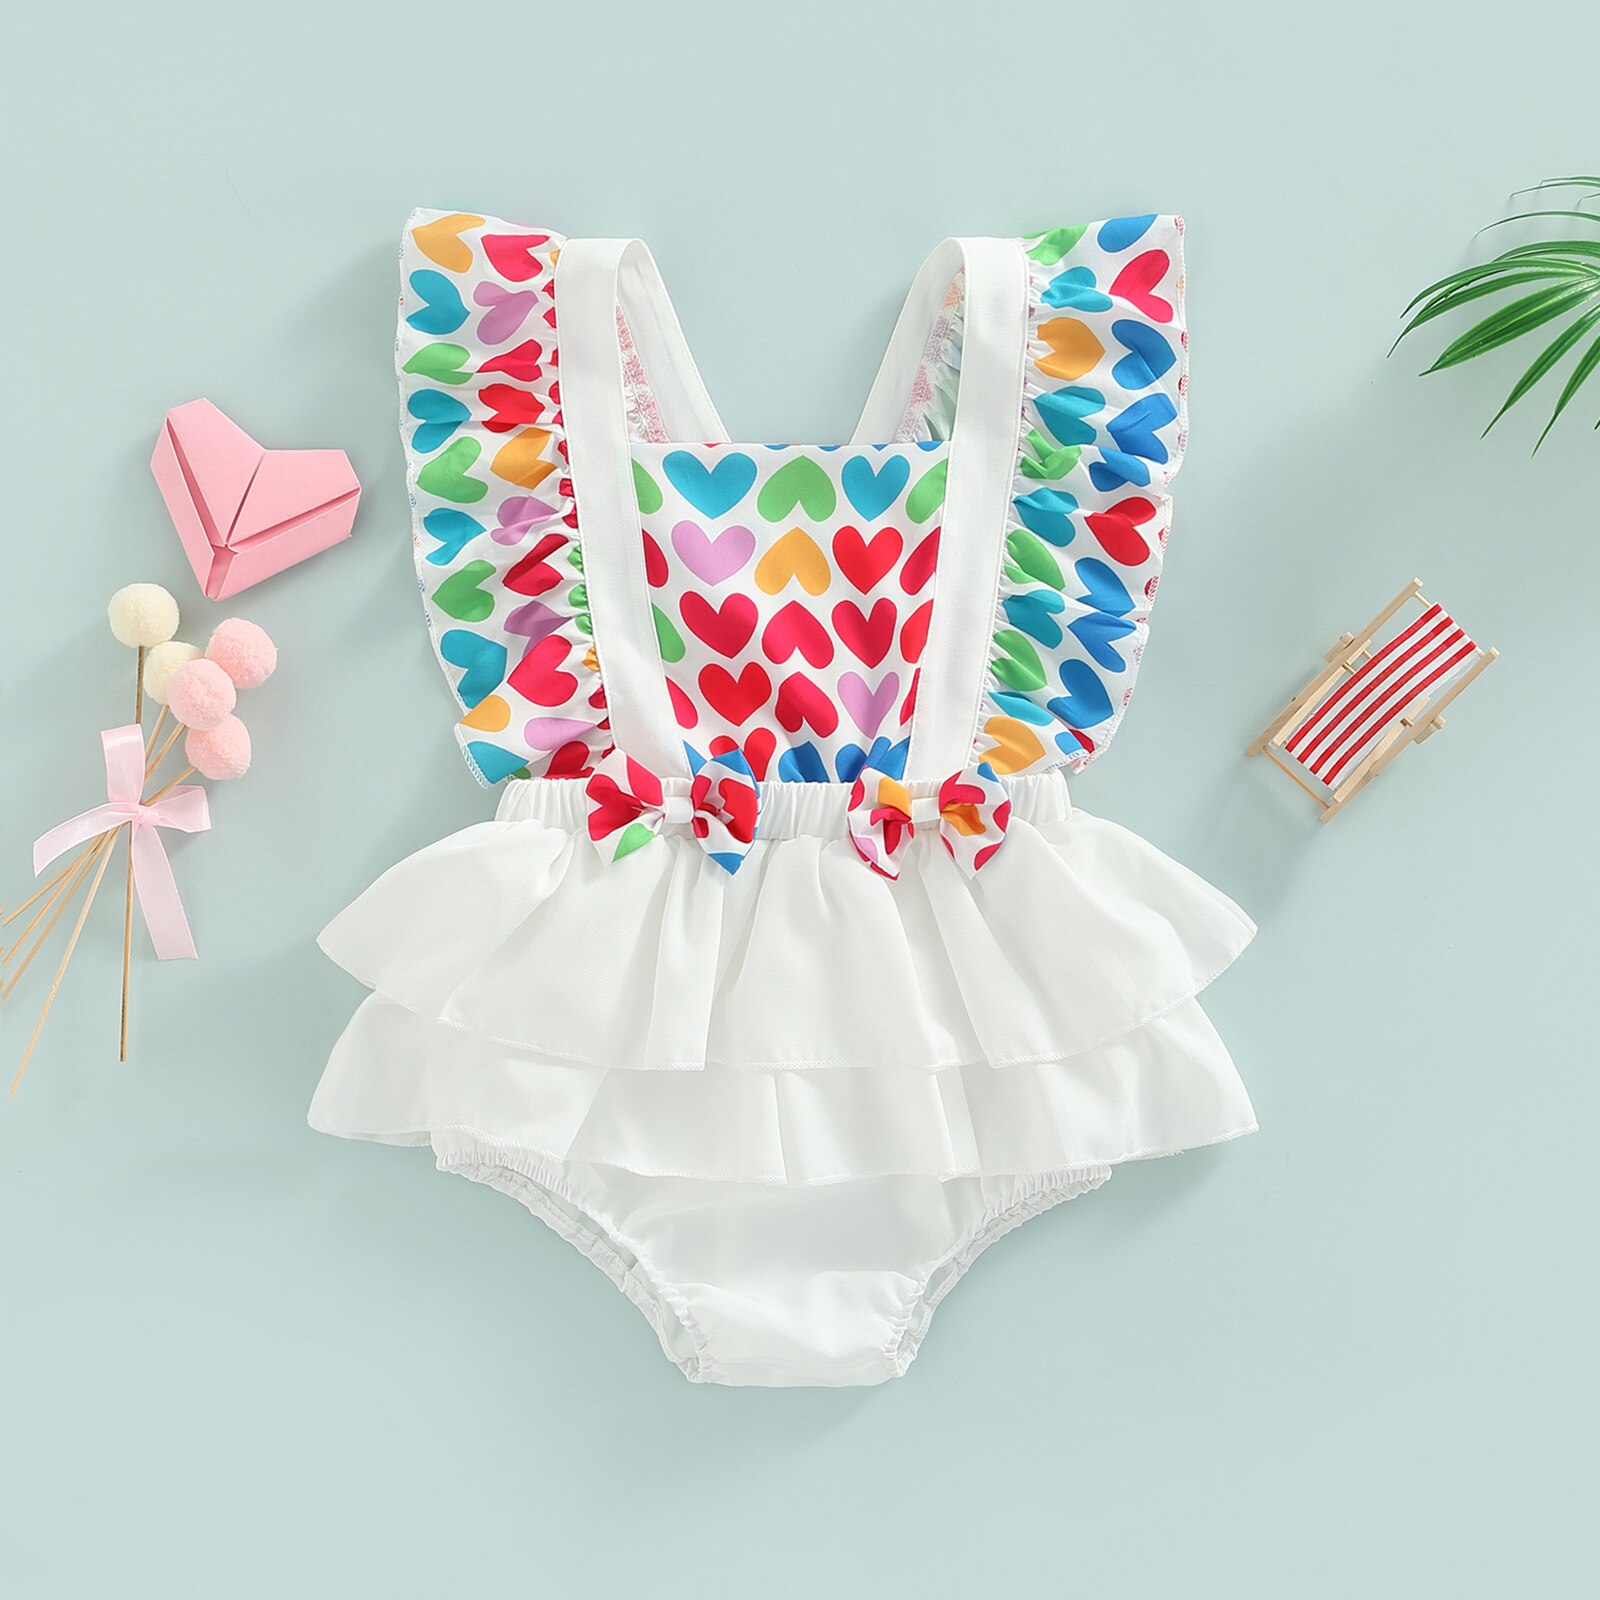 Newborn-Baby-Girl-Flying-Sleeve-Romper-Colorful-Hearts-Printed-Square-Neck-Bowknot-Ruffles-Bodysuit-Jumpsuit-Summer-1